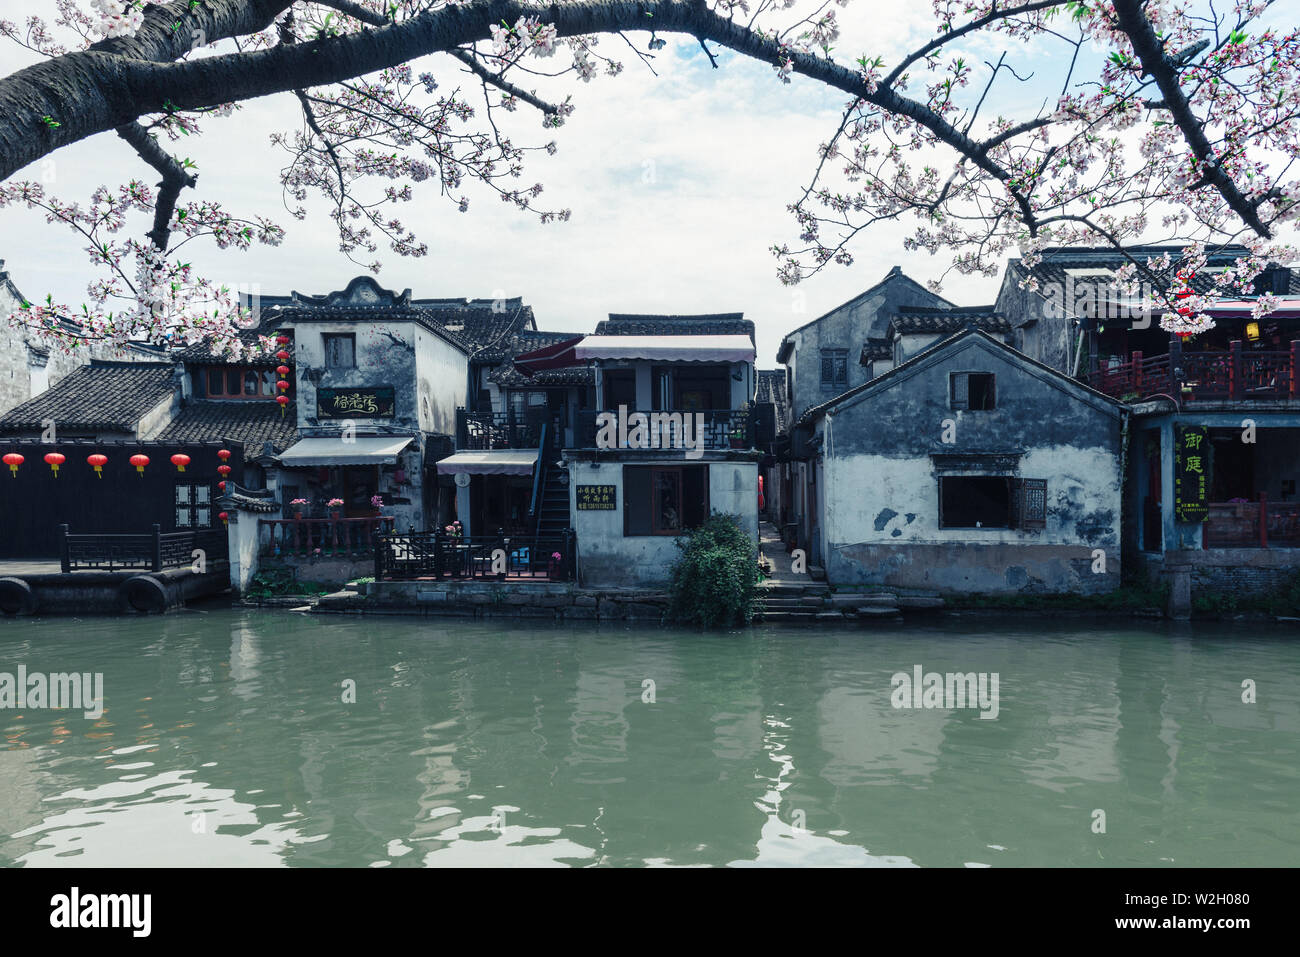 XITANG, CHINA - Mar 31,2019: The Xitang ancient town in cherry blossom season , Xitang is first batch of Chinese historical and cultural town, located Stock Photo